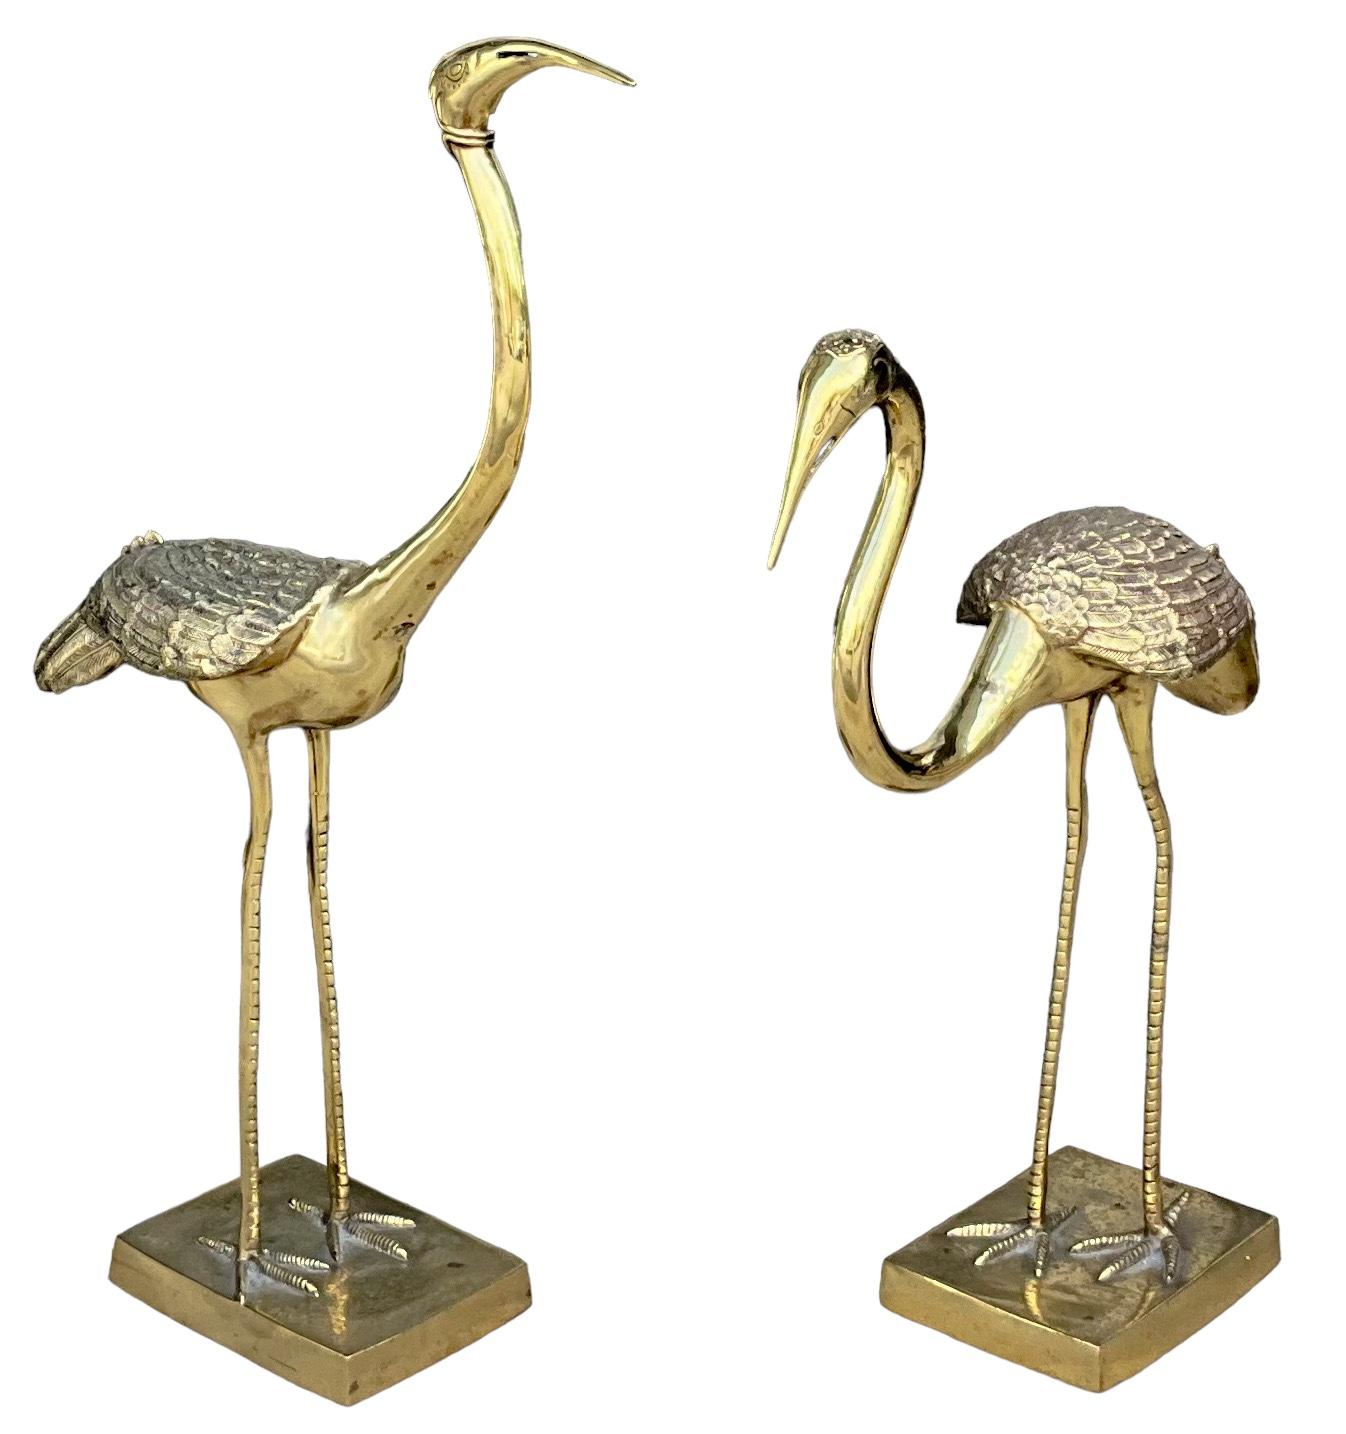 This is a pair of mid-century modern  standing brass cranes or herons in the style of Jack Housman. They are purported to be Italian. They faces have an almost art nouveau appearance to them. They are unmarked and in very good condition. The smaller